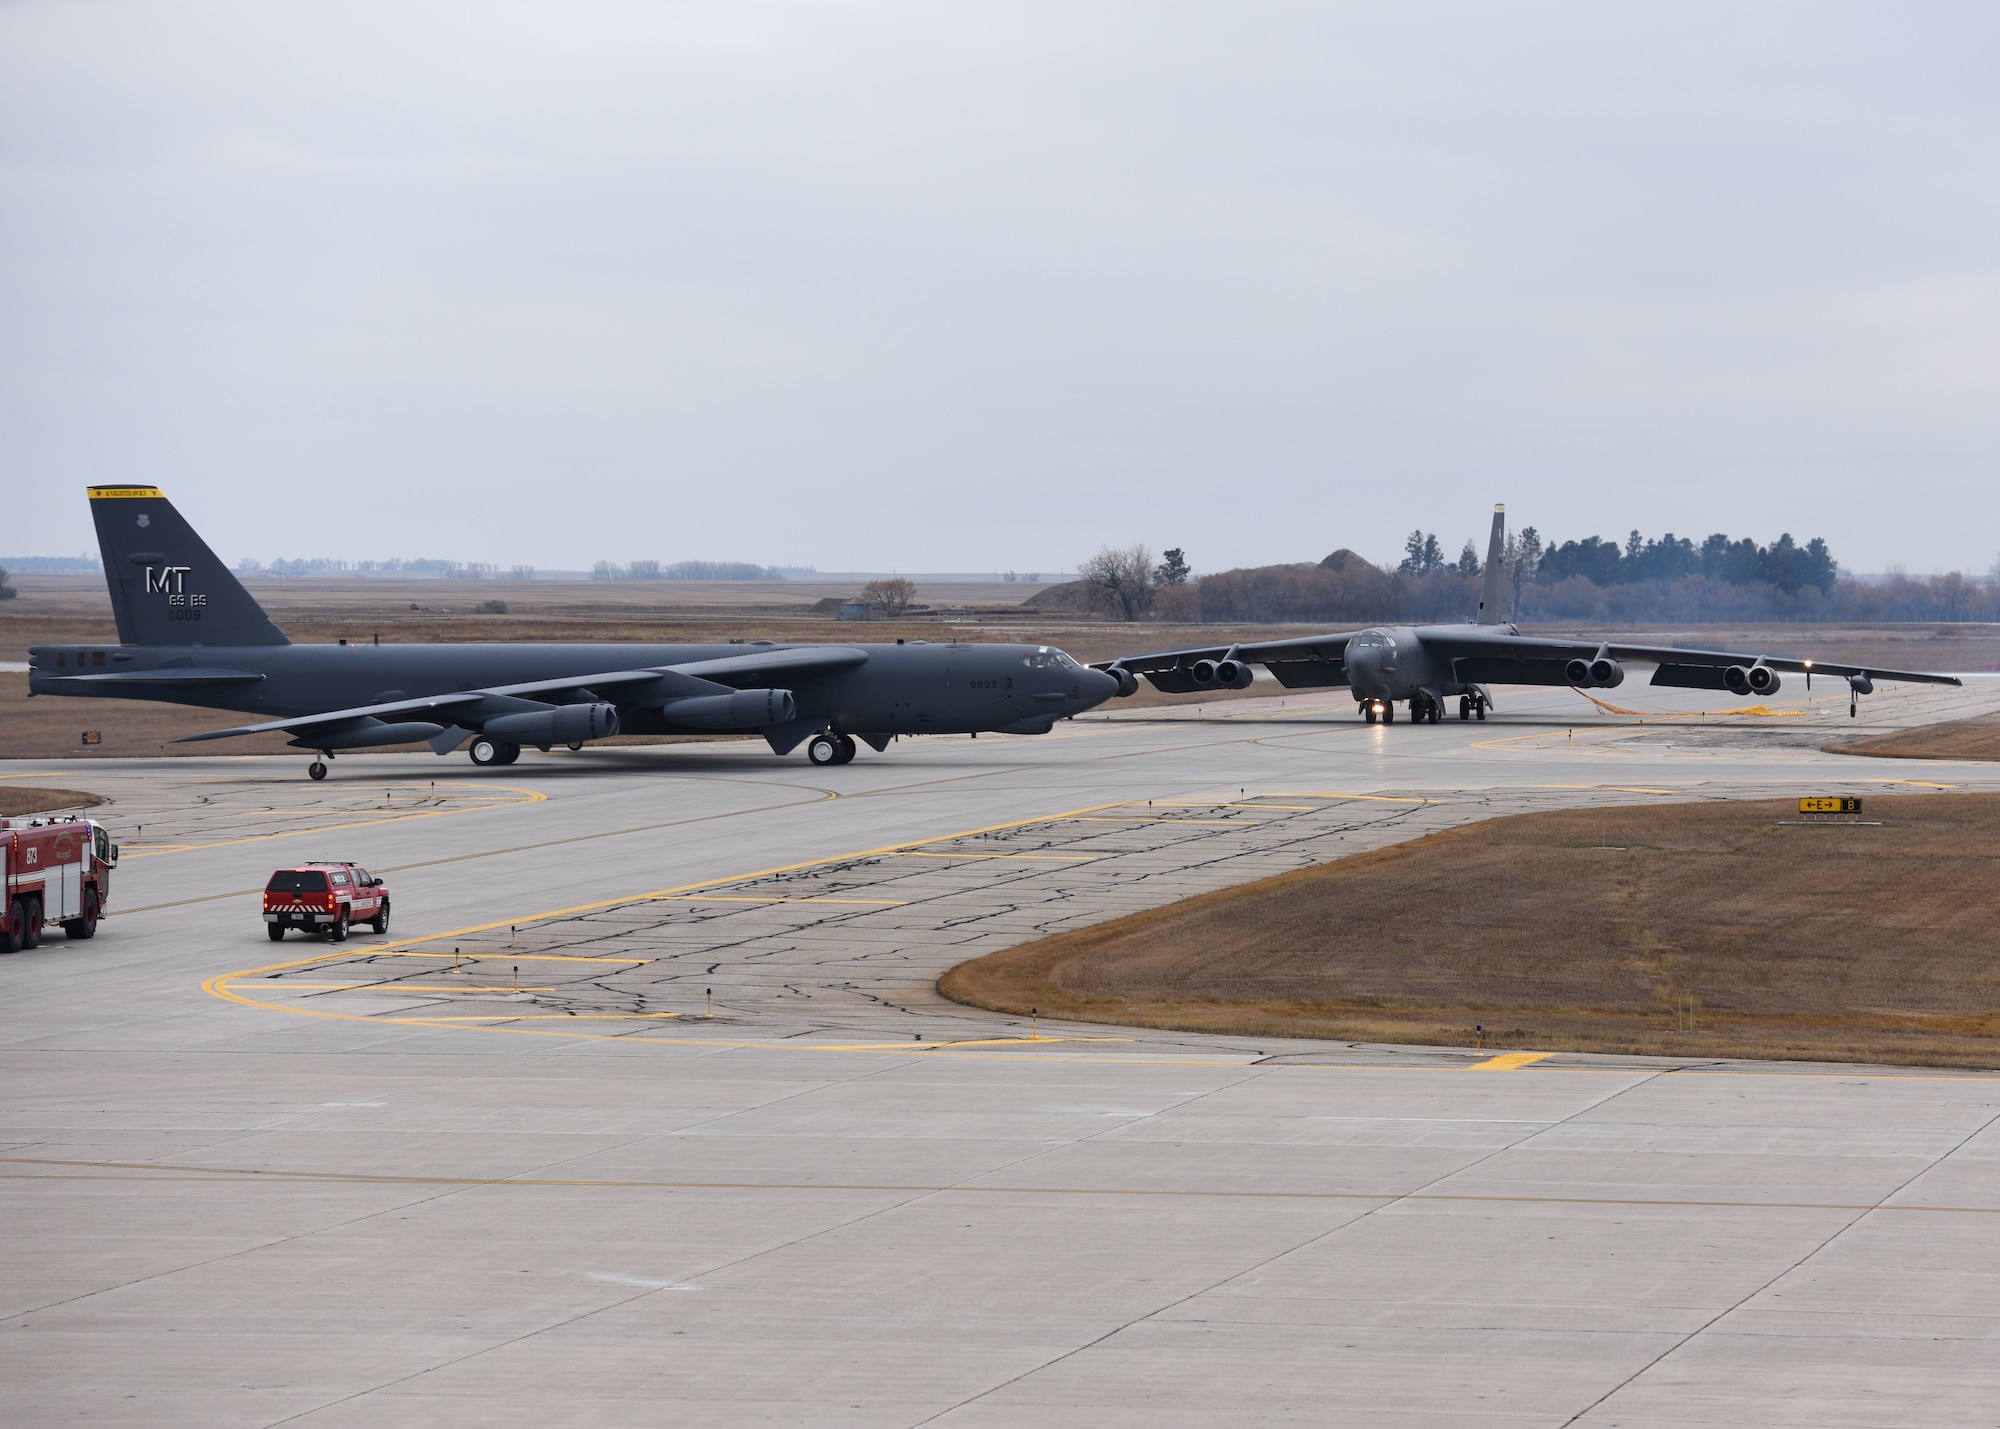 Two B-52H Stratofortresses pass each other on the flightline during Global Thunder 19 at Minot Air Force Base, N.D., Nov. 4, 2018. U.S. Strategic Command headquarters staff, components, and subordinate units participate in Global Thunder to test readiness and ensure a safe, secure, ready and reliable strategic deterrent force. Large-scale exercises of this nature involve extensive planning and coordination and provide unique training for assigned units and allies so they are ready and prepared to execute orders globally wherever and whenever needed. (U.S. Air Force Photo by Airman 1st Class Dillon J. Audit)